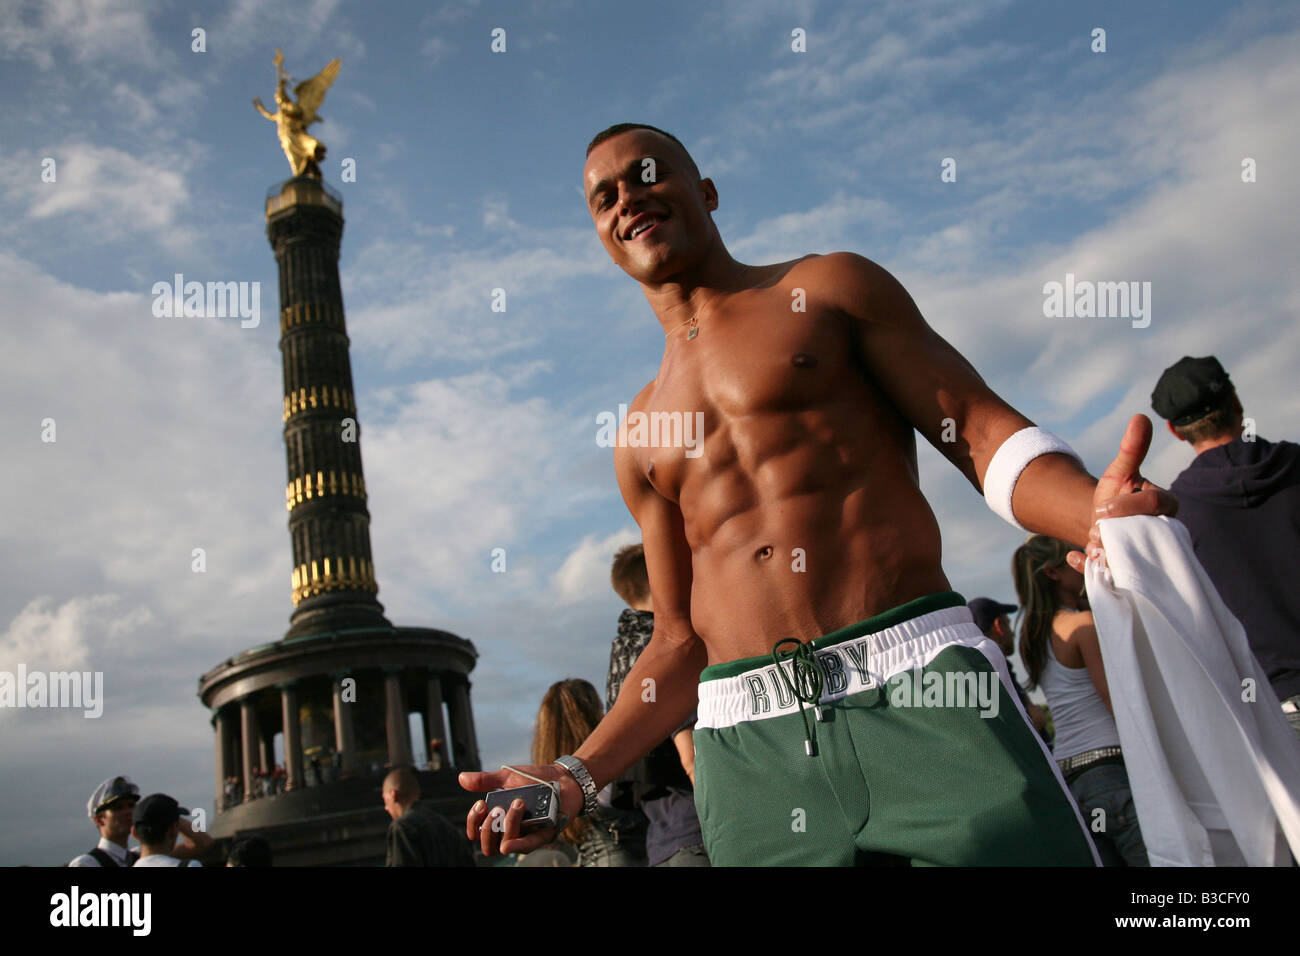 Muscular boy in front of the Victory Column during the Christopher Street Day Pride in Berlin, Germany Stock Photo